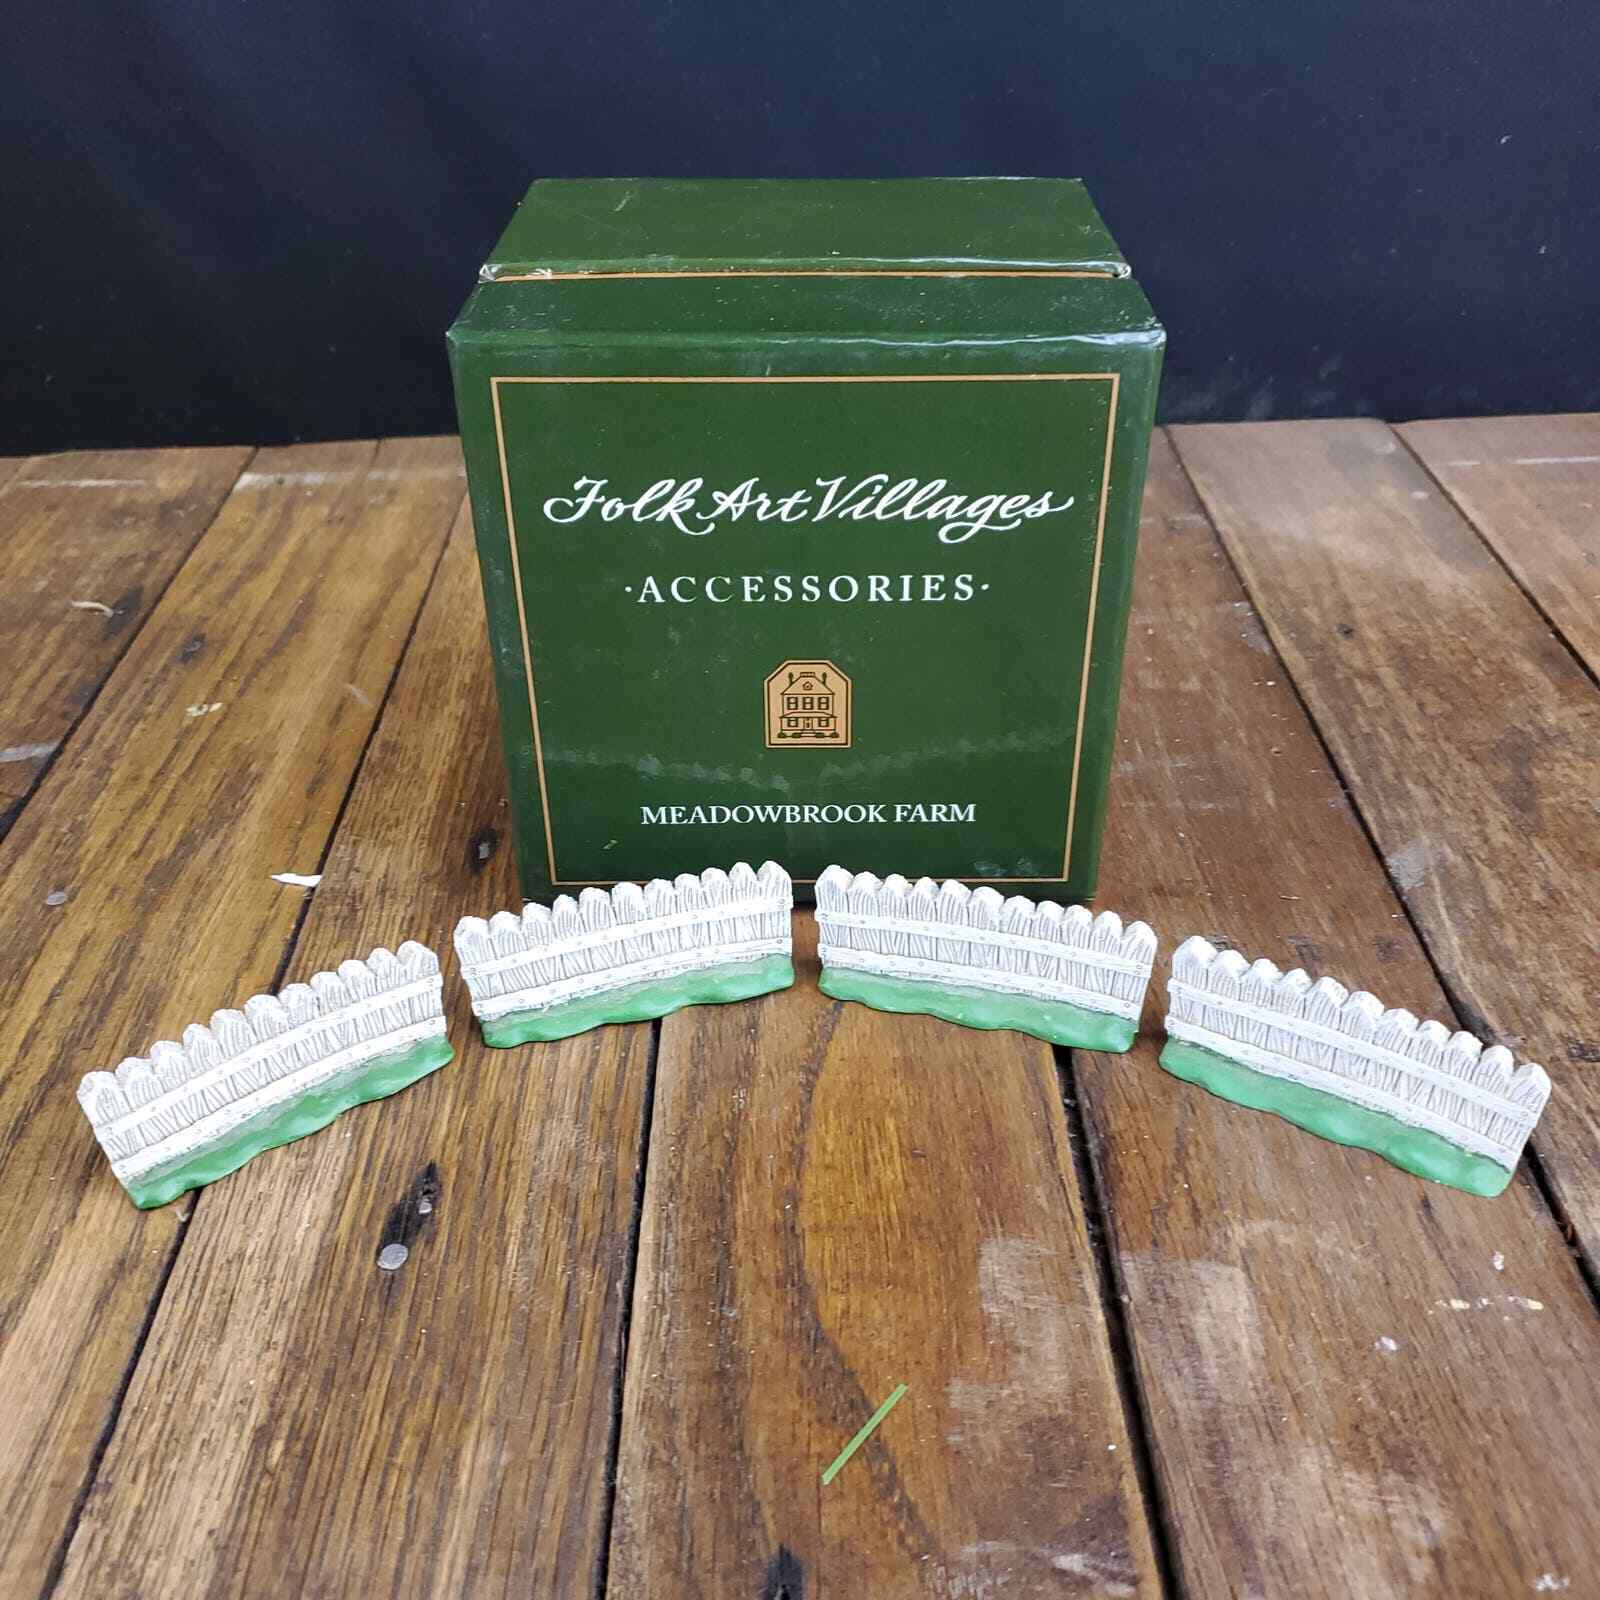 Lang and Wise Meadowbrook Farm Set of 4 Picket Fences (Green Base) 30010999